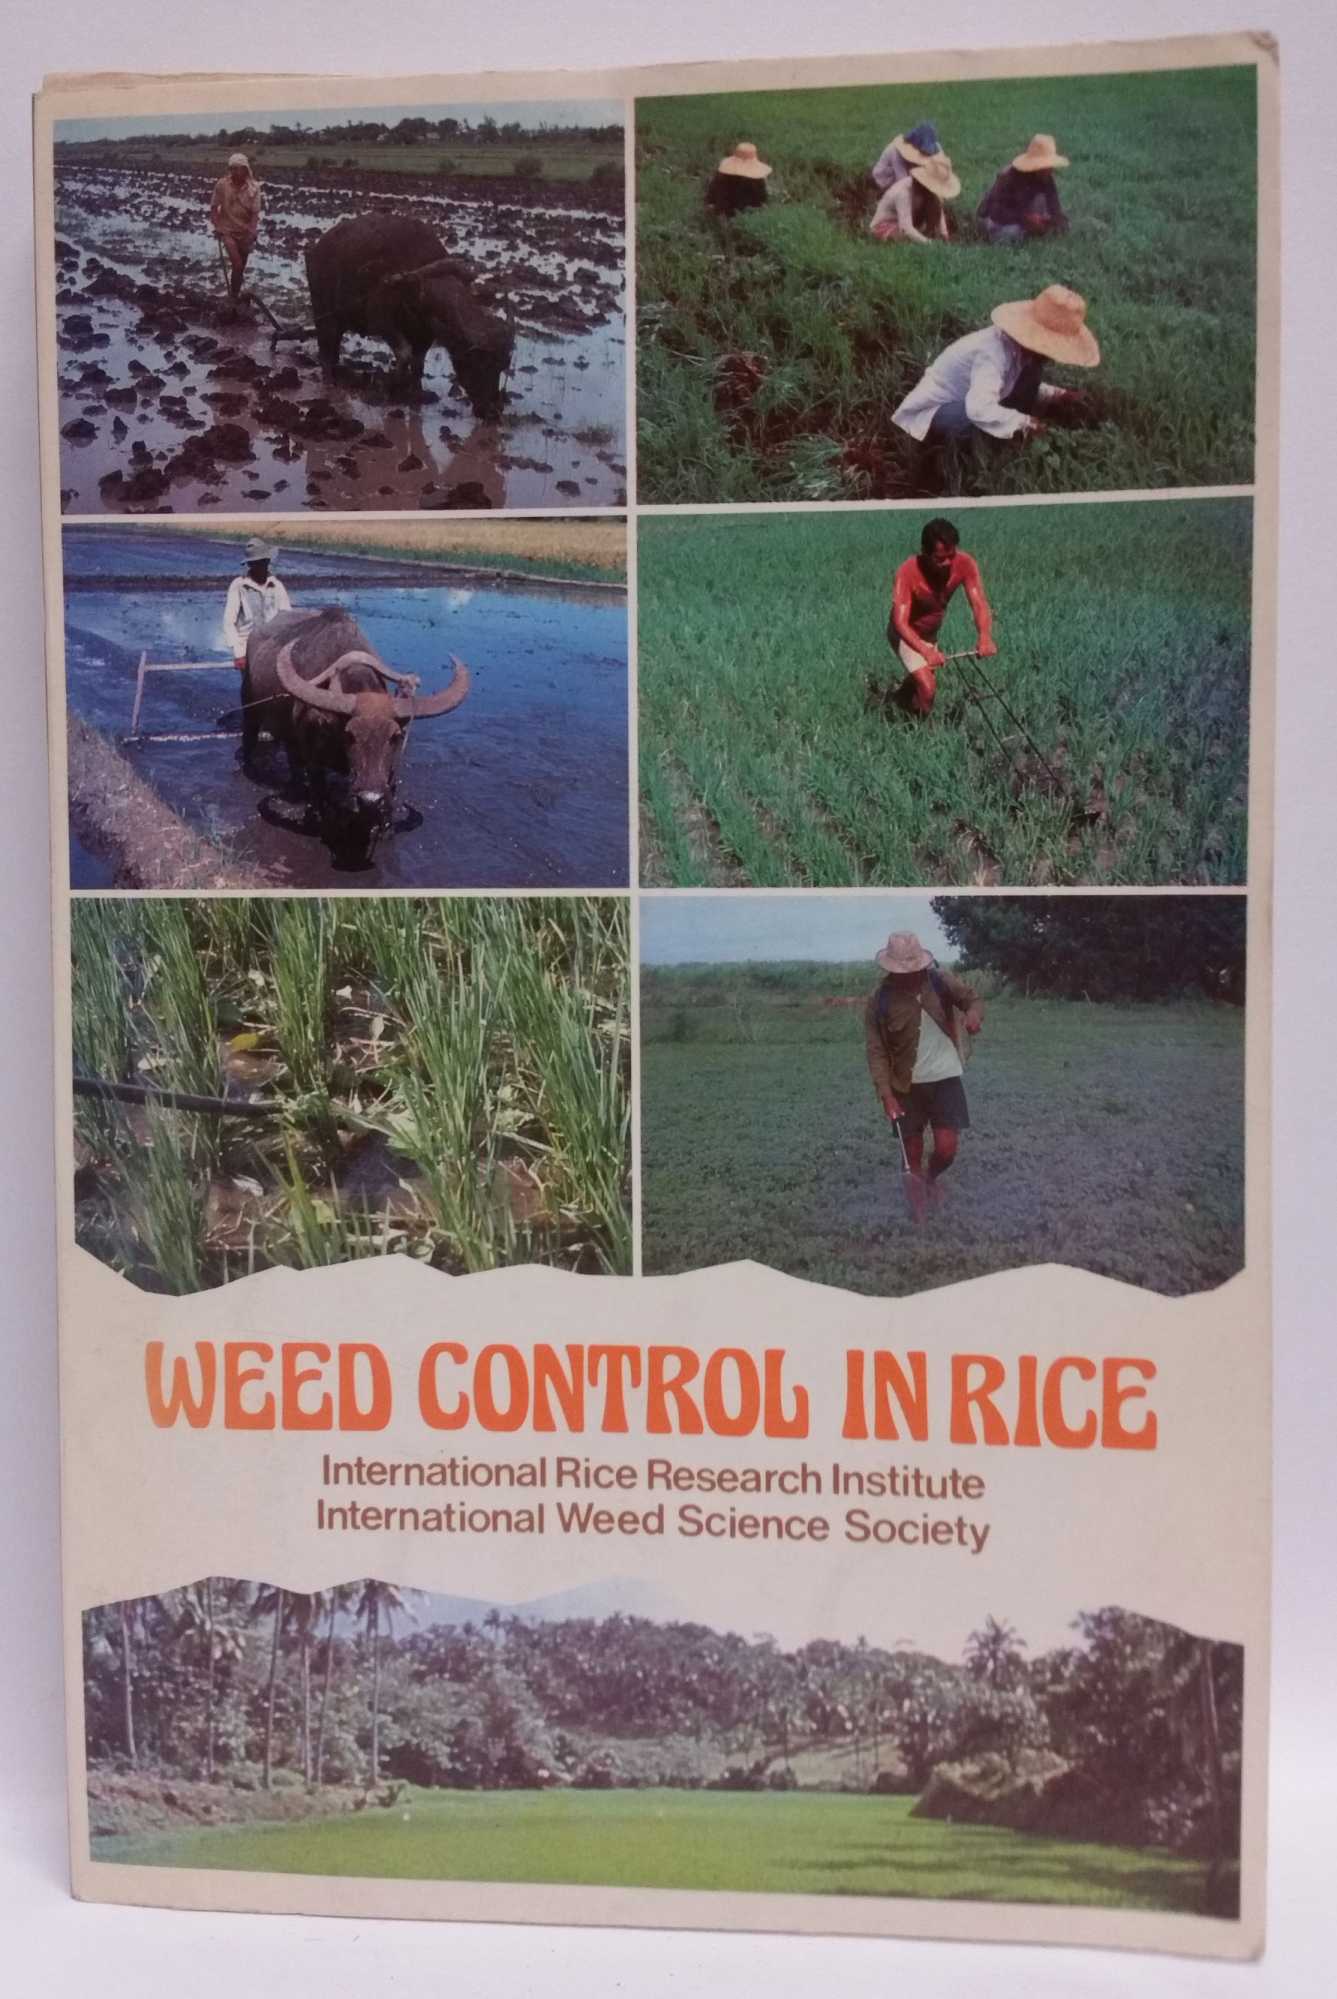 International Rice Research Institute - Proceedings of the Conference On Weed Control In Rice (31 August-4 September, 1981)